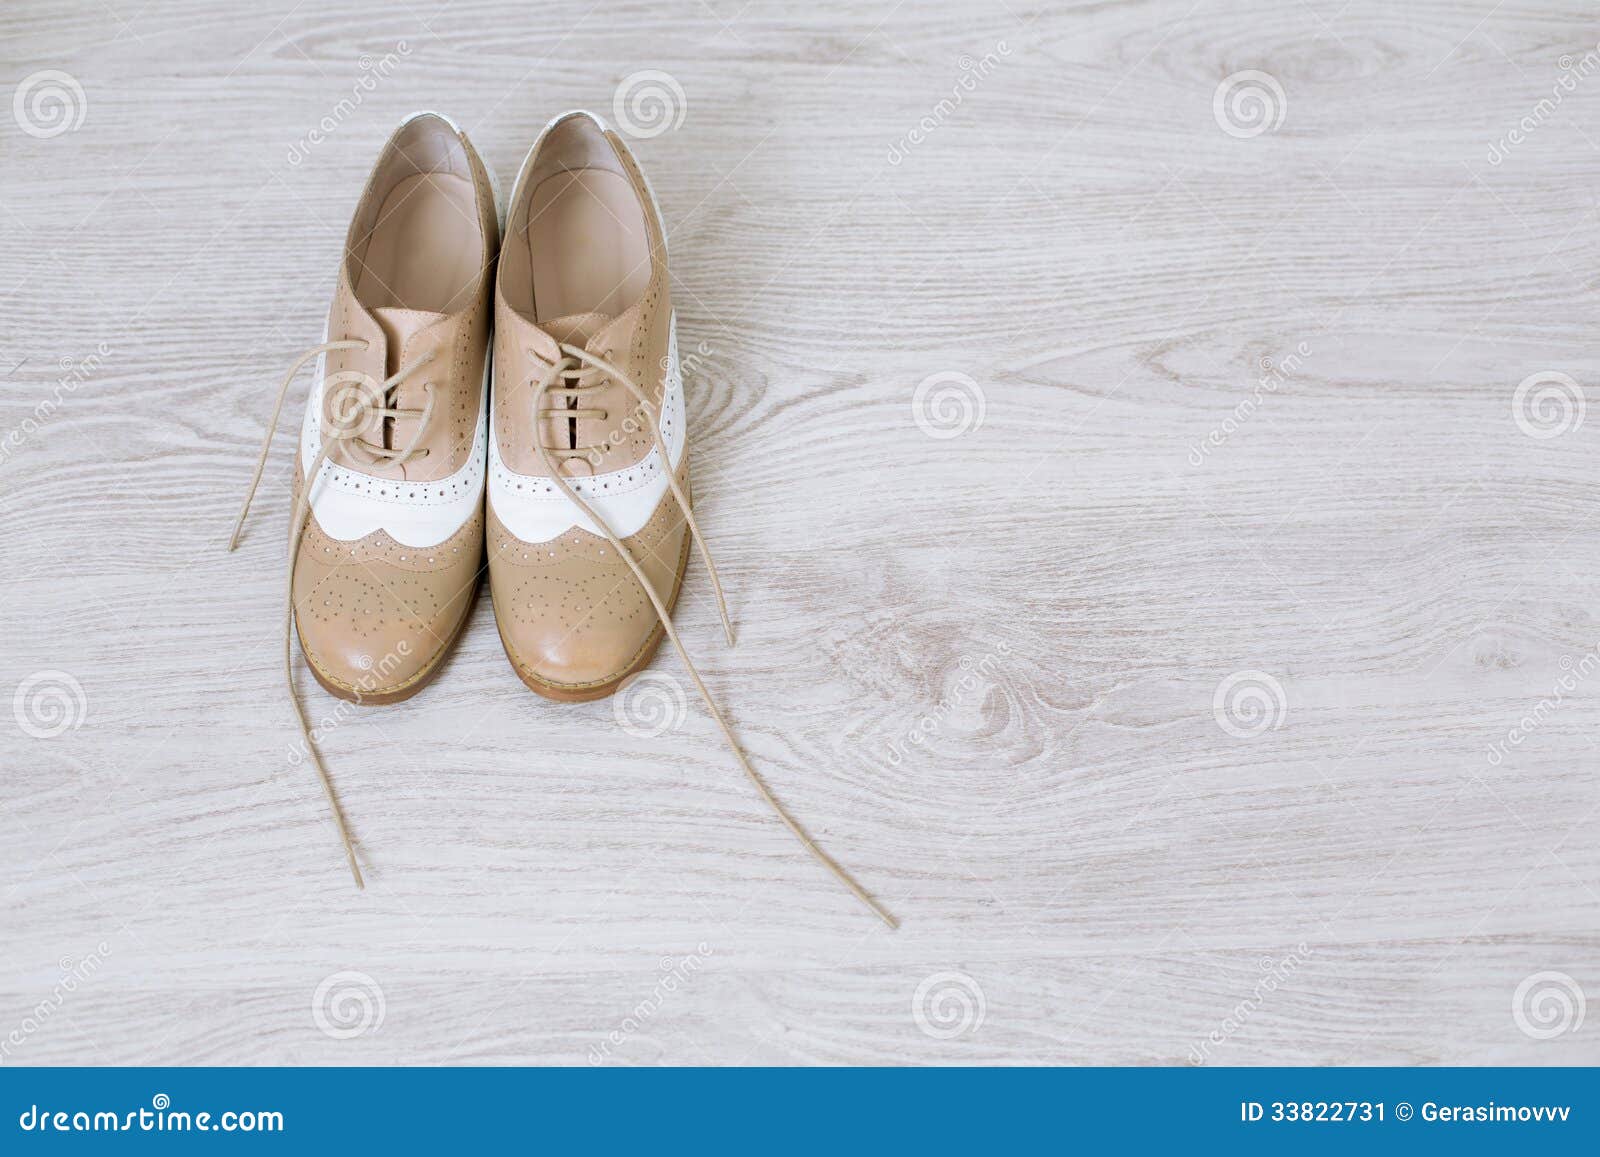 Pair of new shoes stock image. Image of laces, white - 33822731